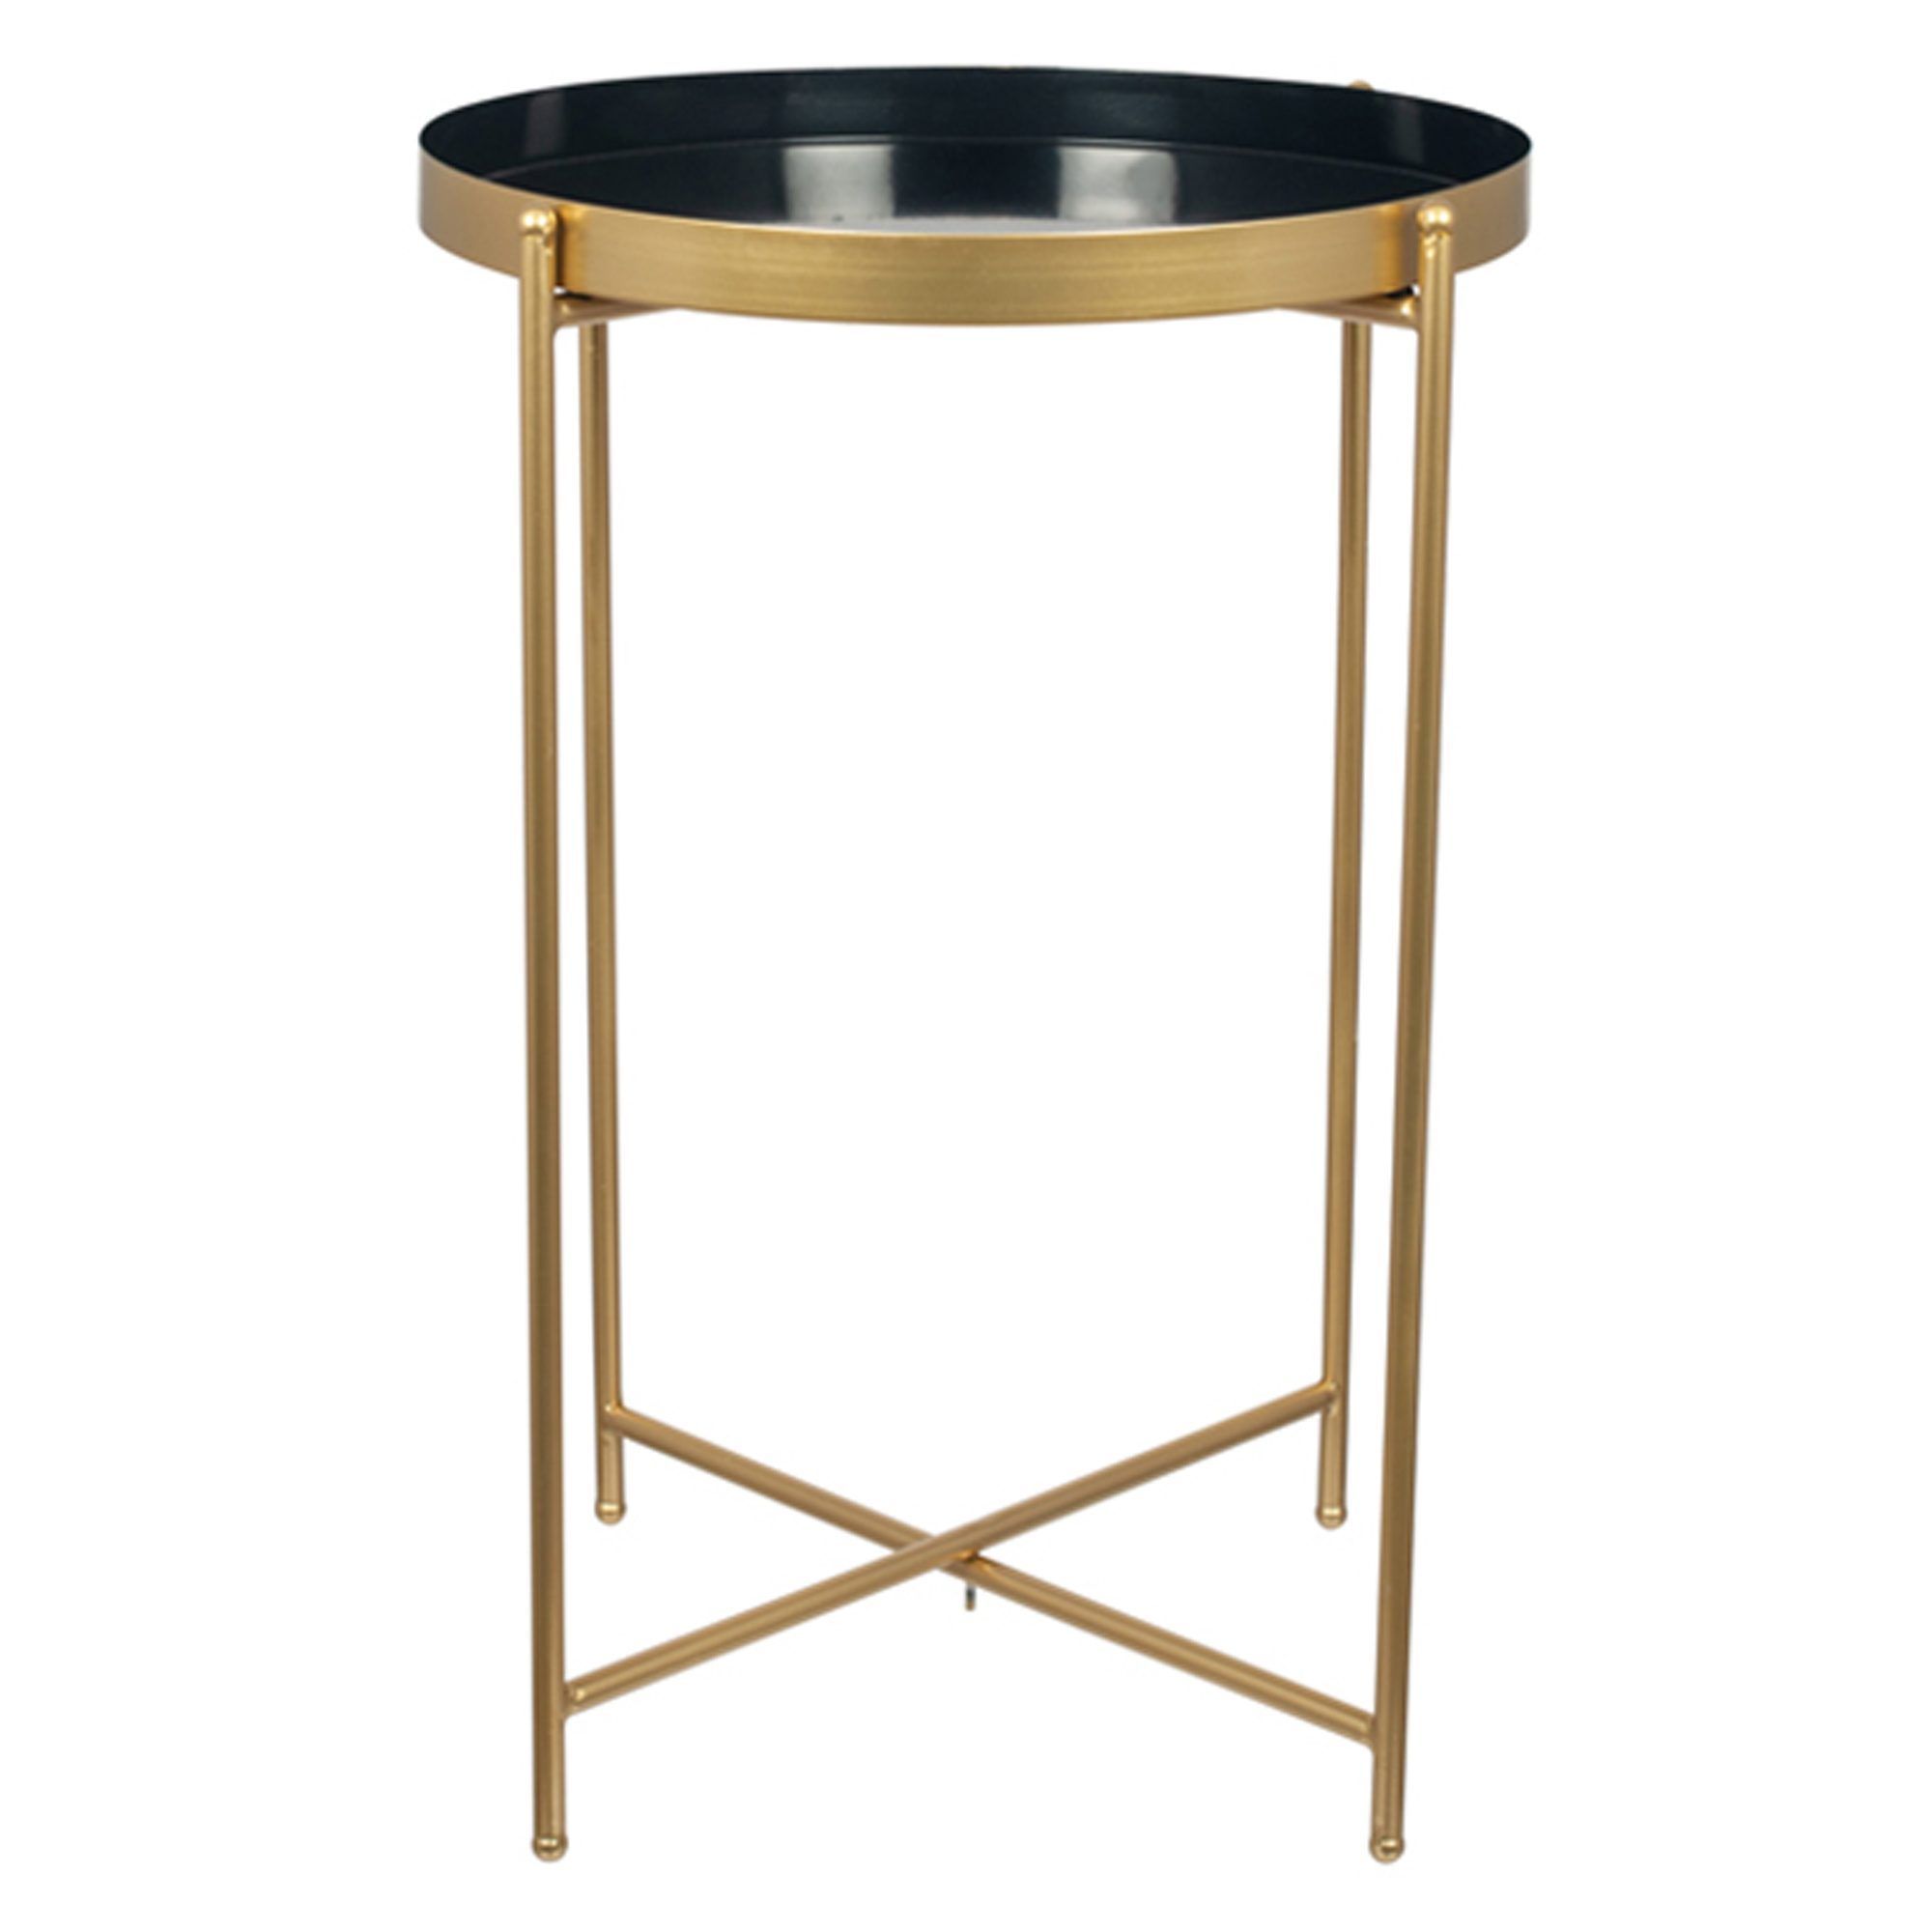 Black & Gold Metal Round Side Table | Black Side Table, Round Metal Intended For Metal Side Tables For Living Spaces (Gallery 9 of 20)